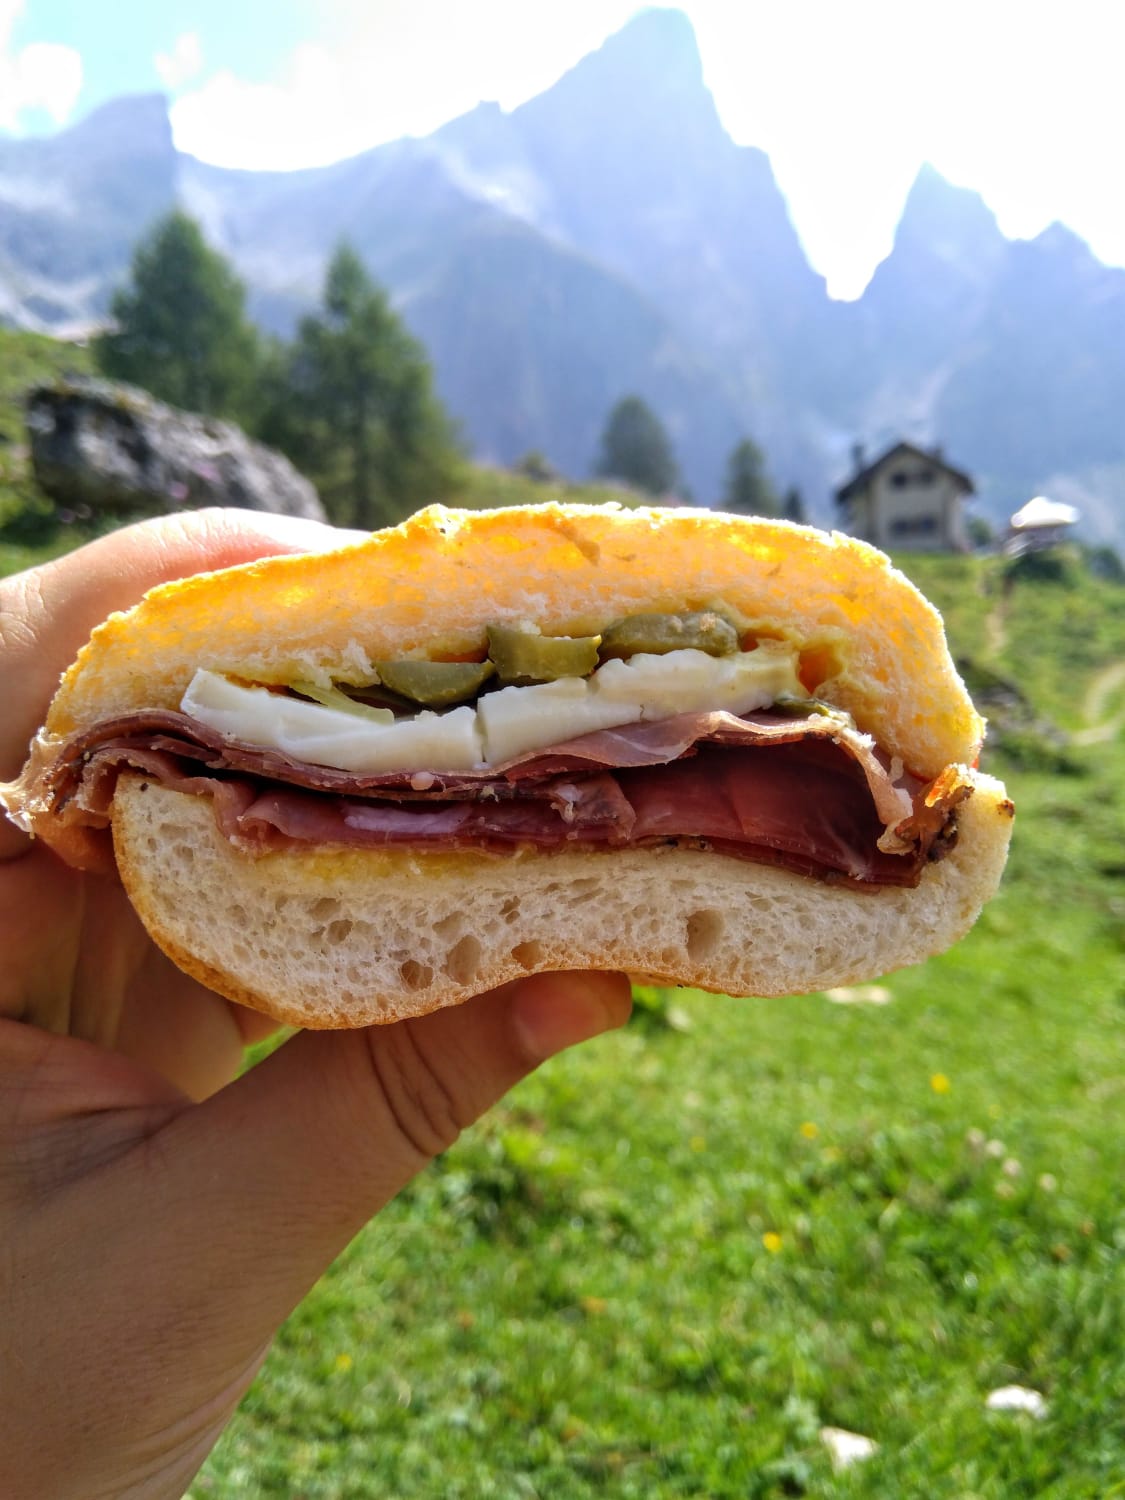 [I made] this sandwich: speck (smoked pork), Fior di Primiero cheese (brie-like), pickles, mayo and mustard blend. In background, the Dolomites of the Italian Alps.